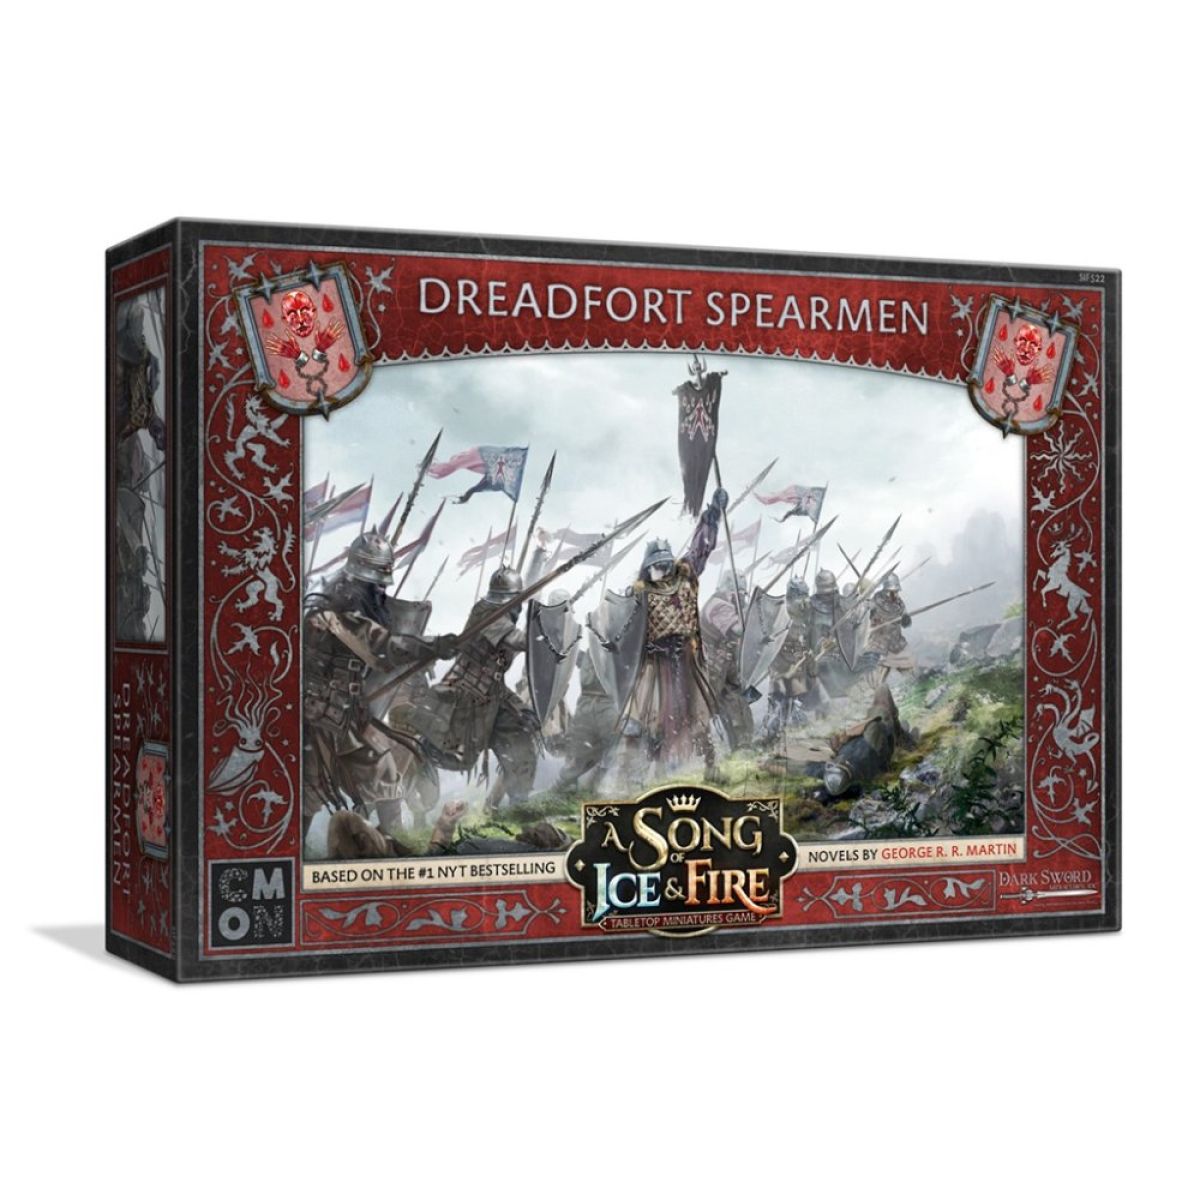 A Song of Ice and Fire Dreadfort Spearmen